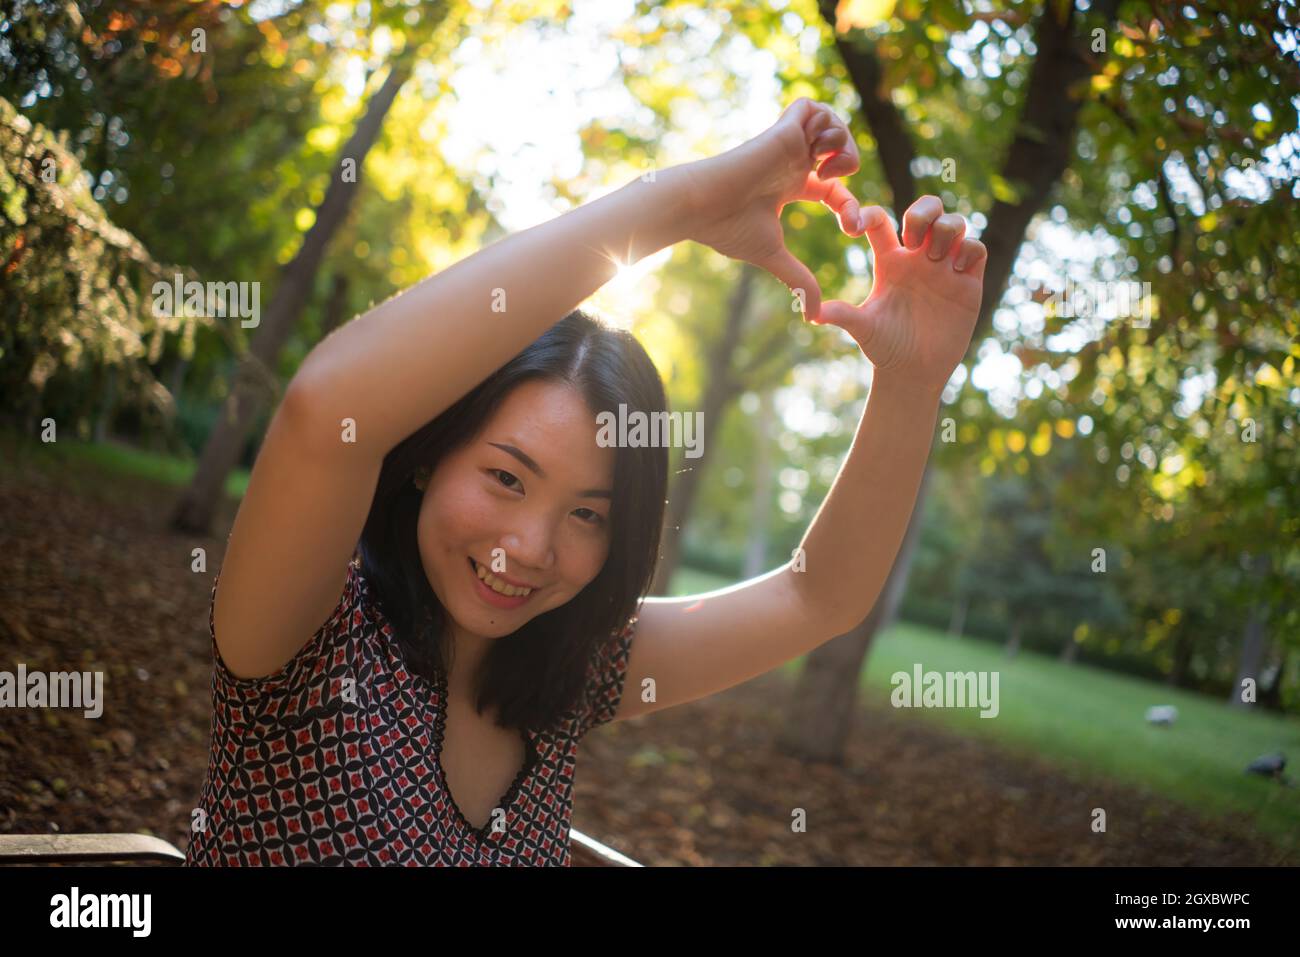 outdoors lifestyle portrait of young happy and beautiful Asian Chinese woman enjoying relaxed and cheerful at city park in Autumn doing love heart sha Stock Photo